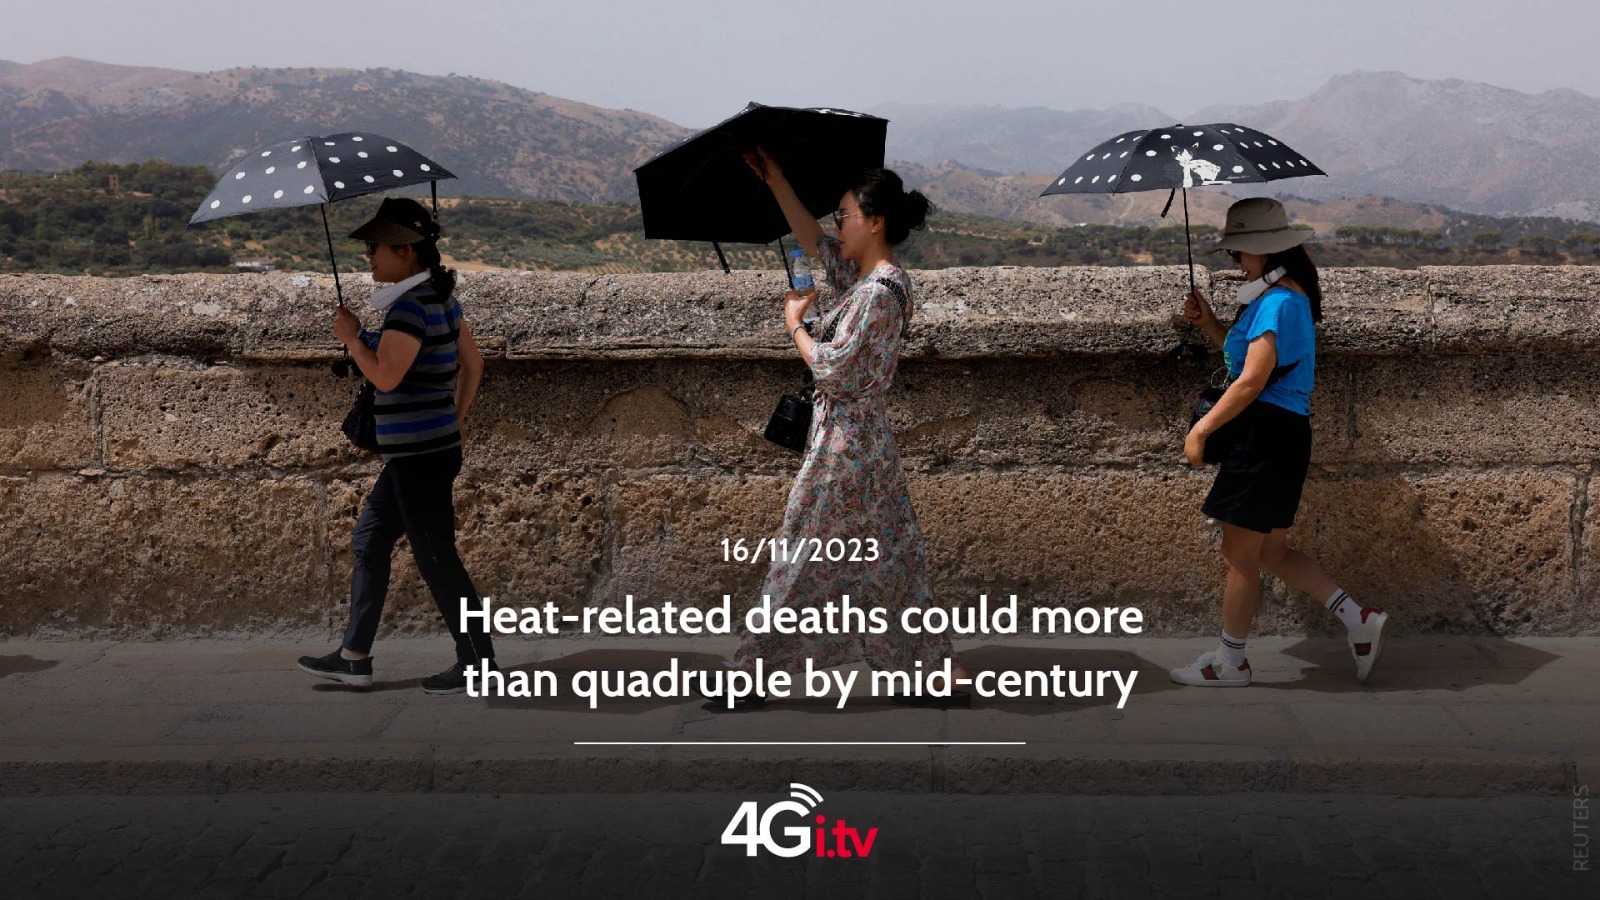 Подробнее о статье Heat-related deaths could more than quadruple by mid-century